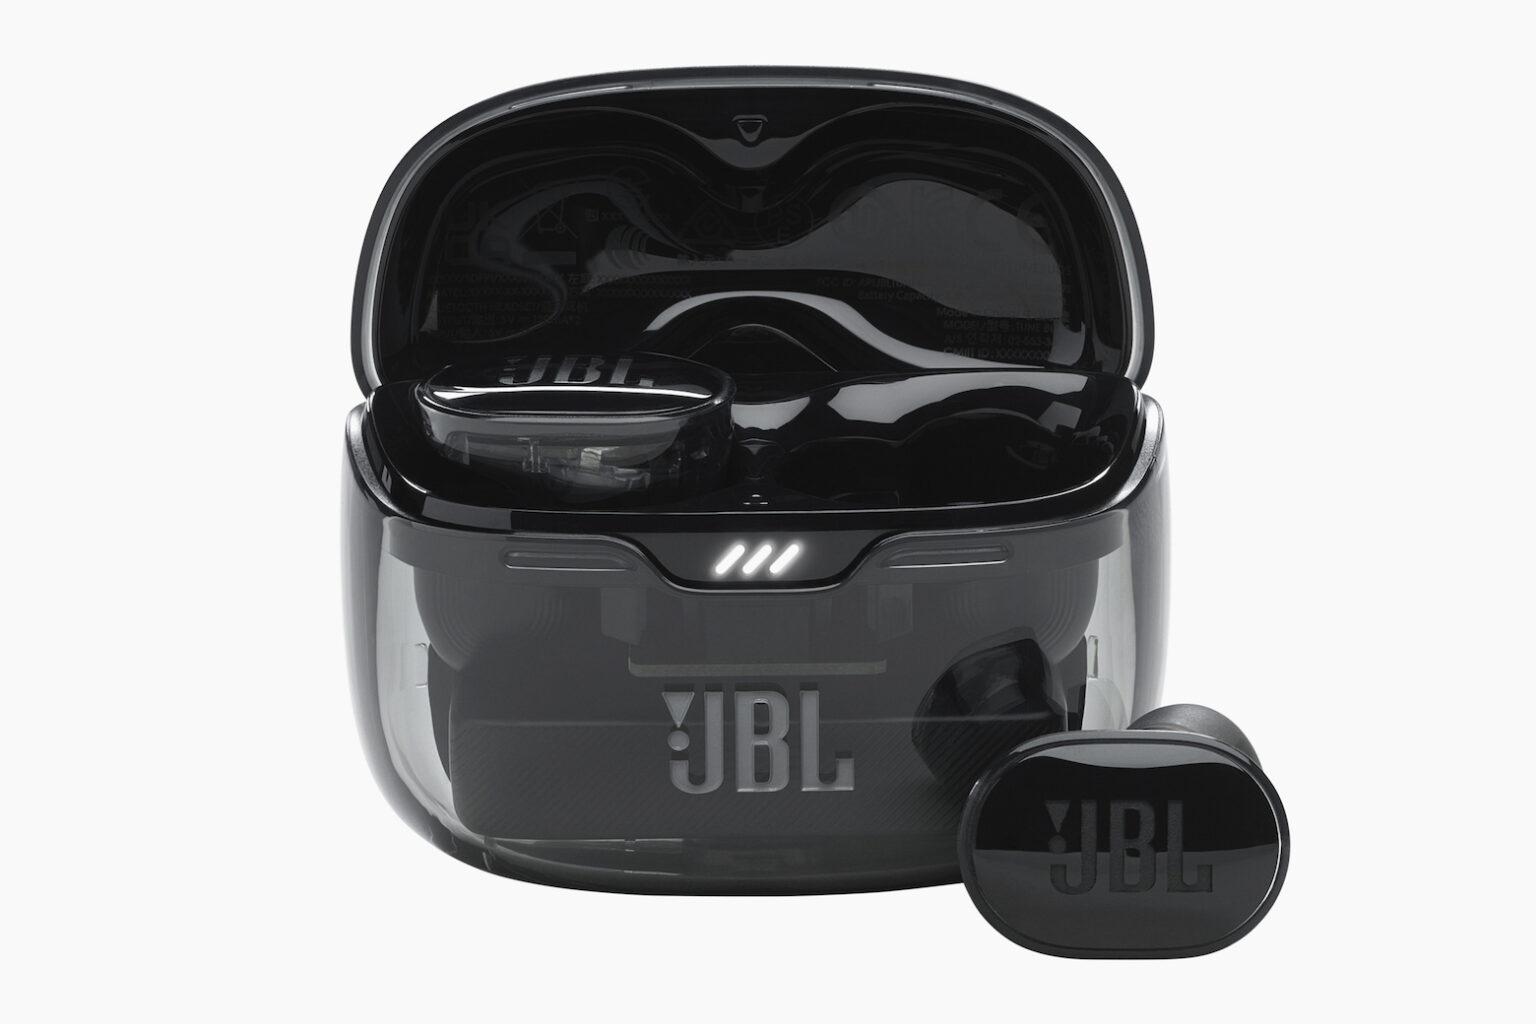 Take $40 off these true JBL earbuds with active noise cancelling.